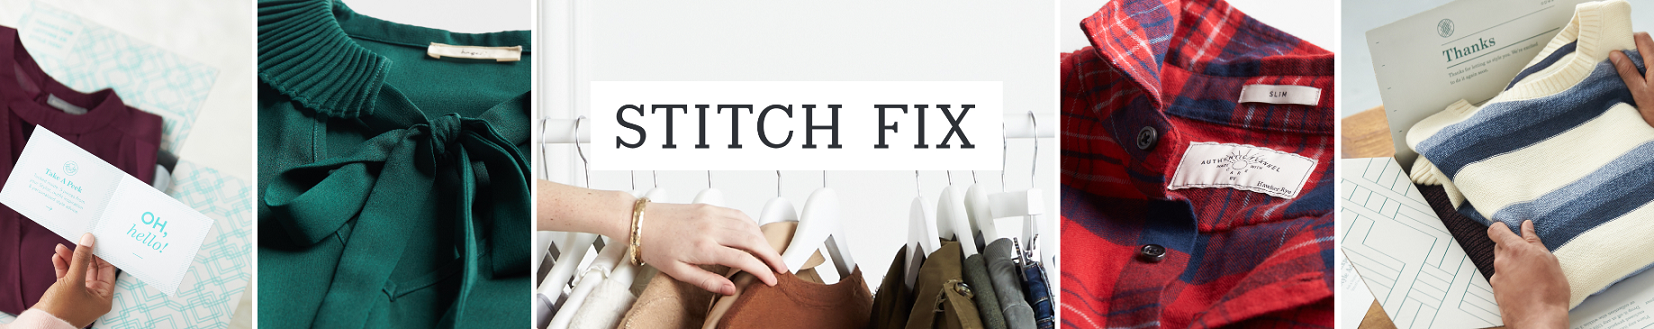 Stitch Fix clothing and greeting and thank you cards